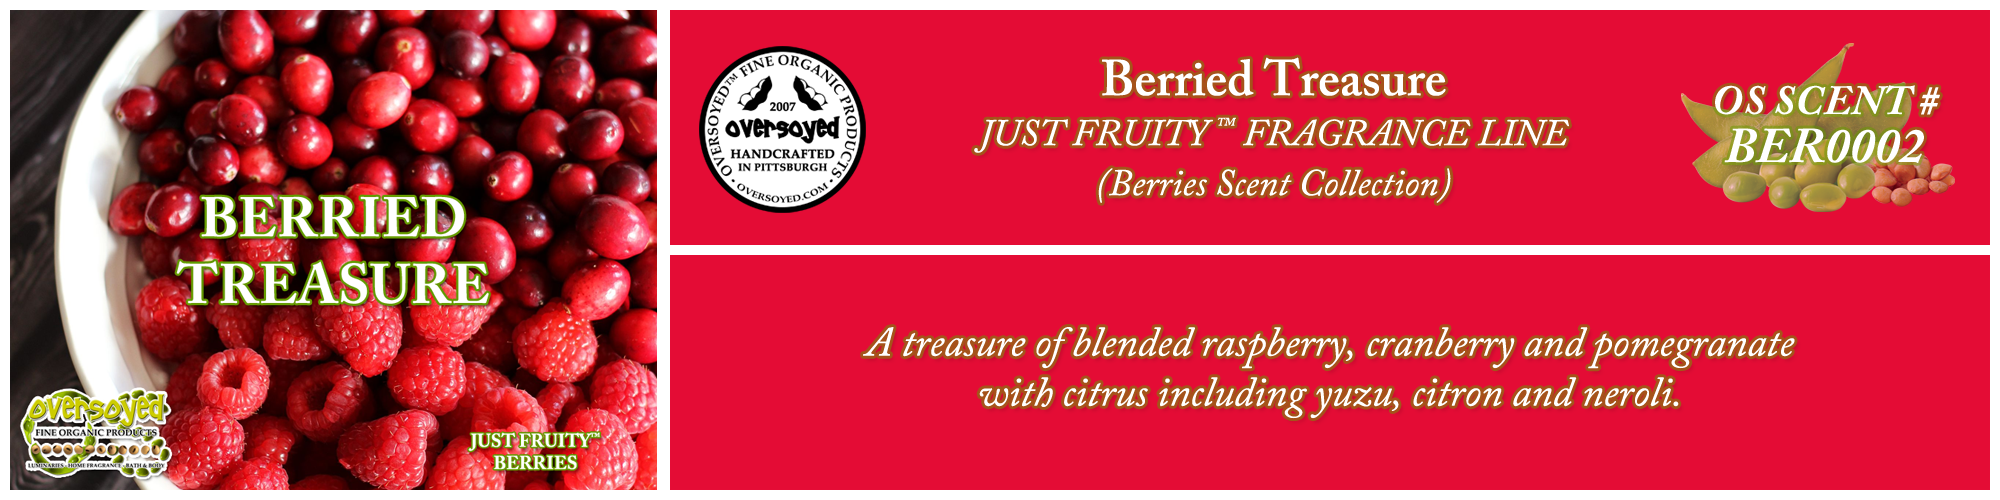 Berried Treasure Handcrafted Products Collection